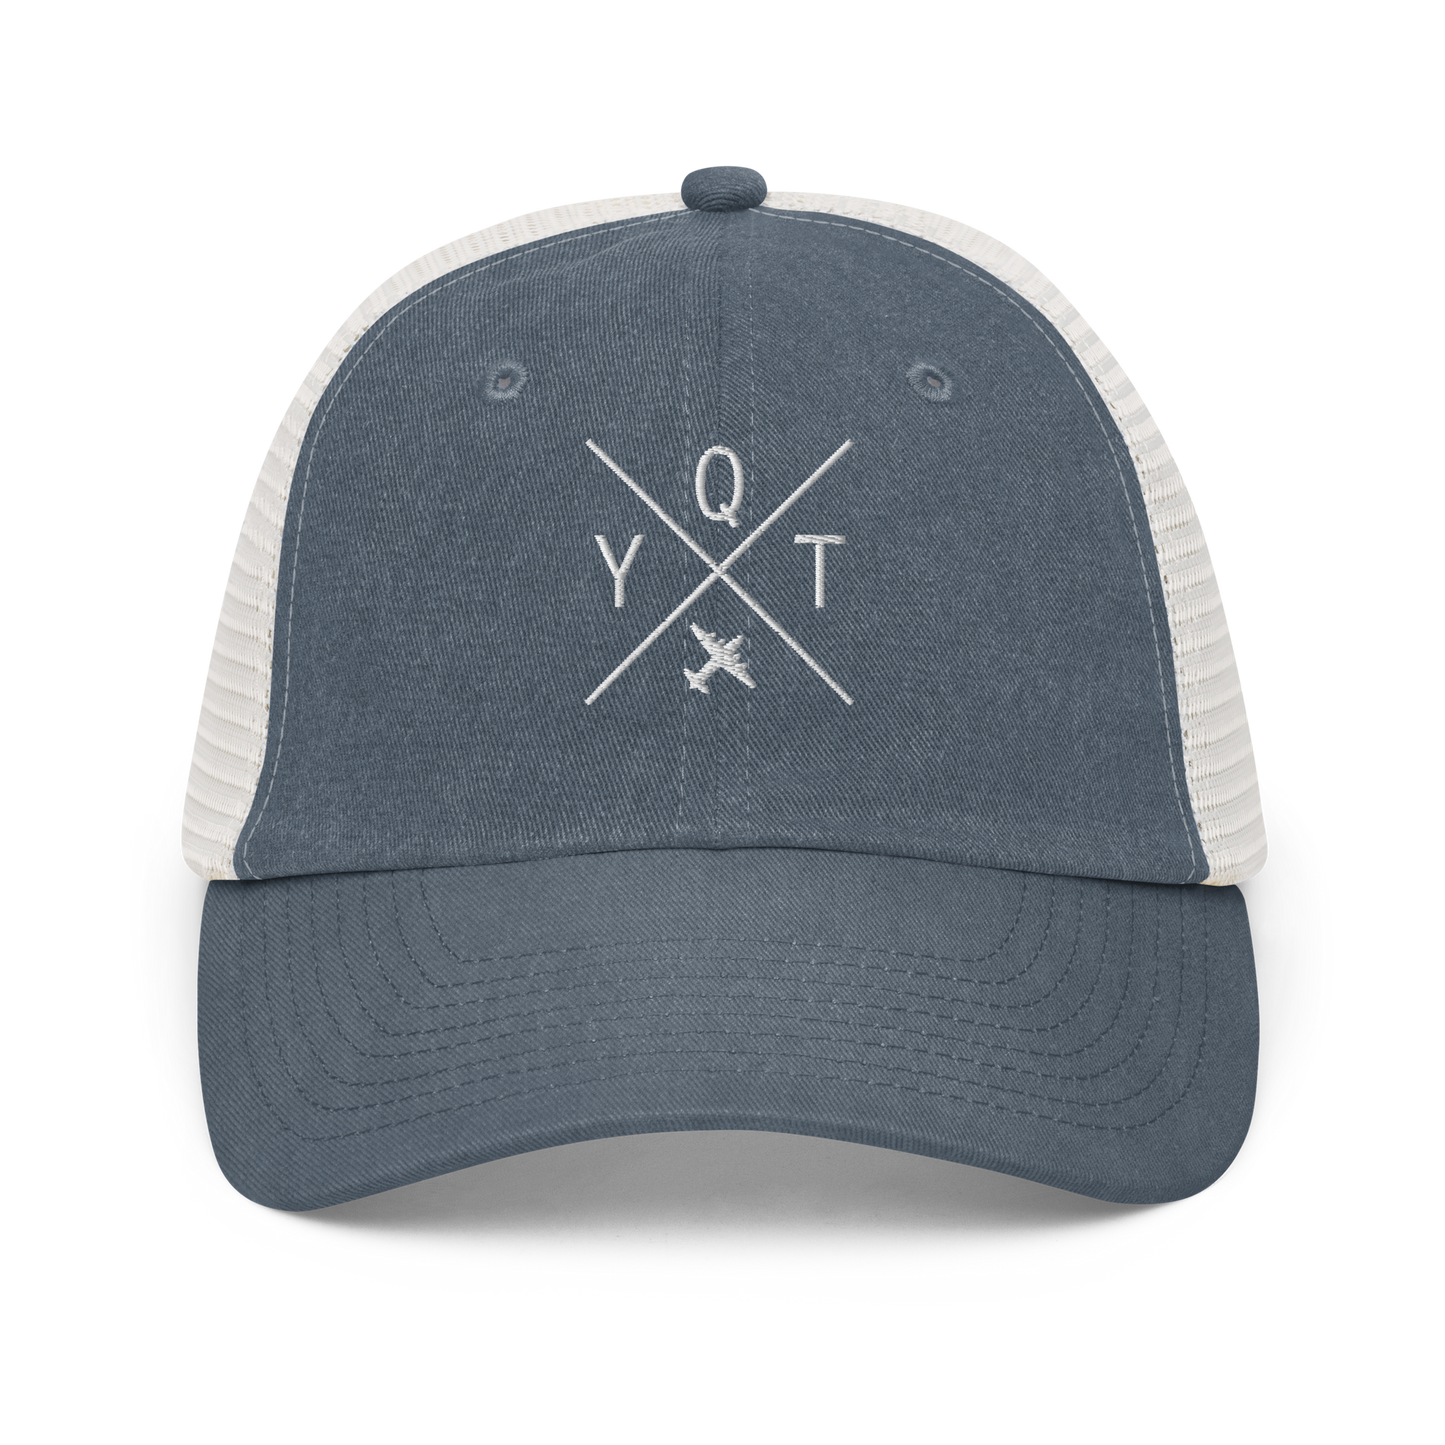 YHM Designs - YQT Thunder Bay Pigment-Dyed Trucker Cap - Crossed-X Design with Airport Code and Vintage Propliner - White Embroidery - Image 06